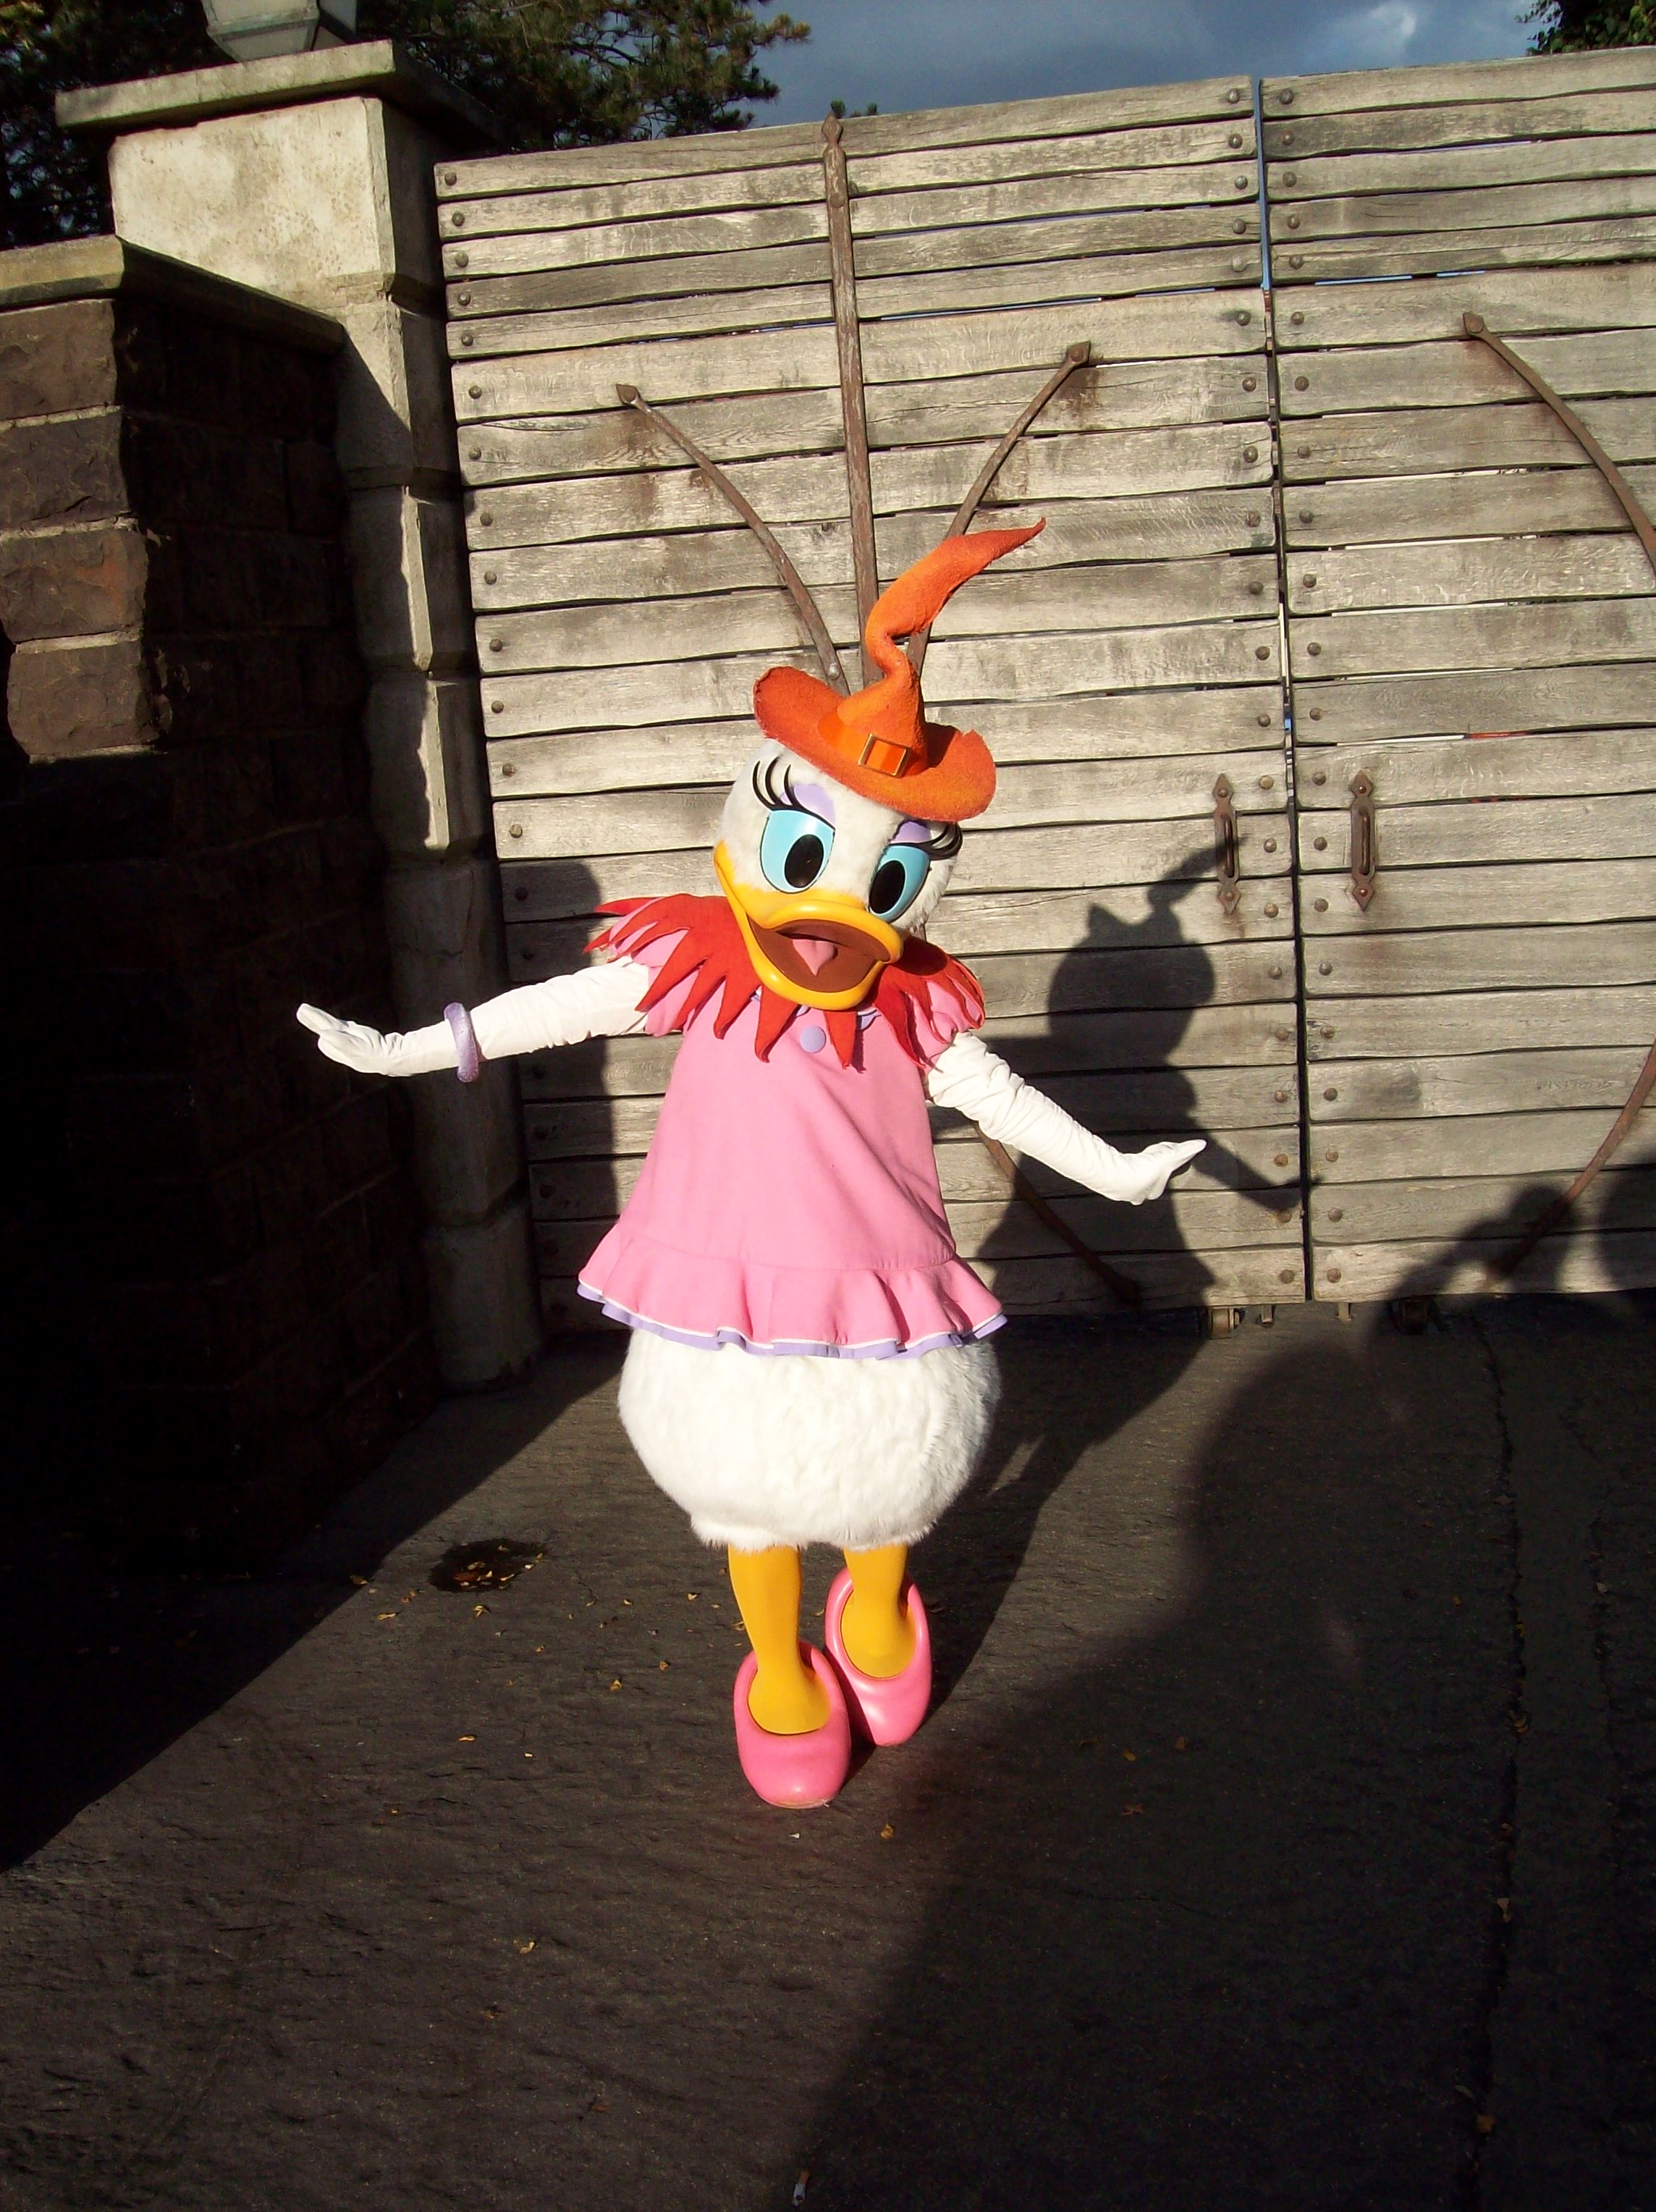 In 2008 Daisy was meeting guests in front of Phantom Manor wearing a orange witch outfit.